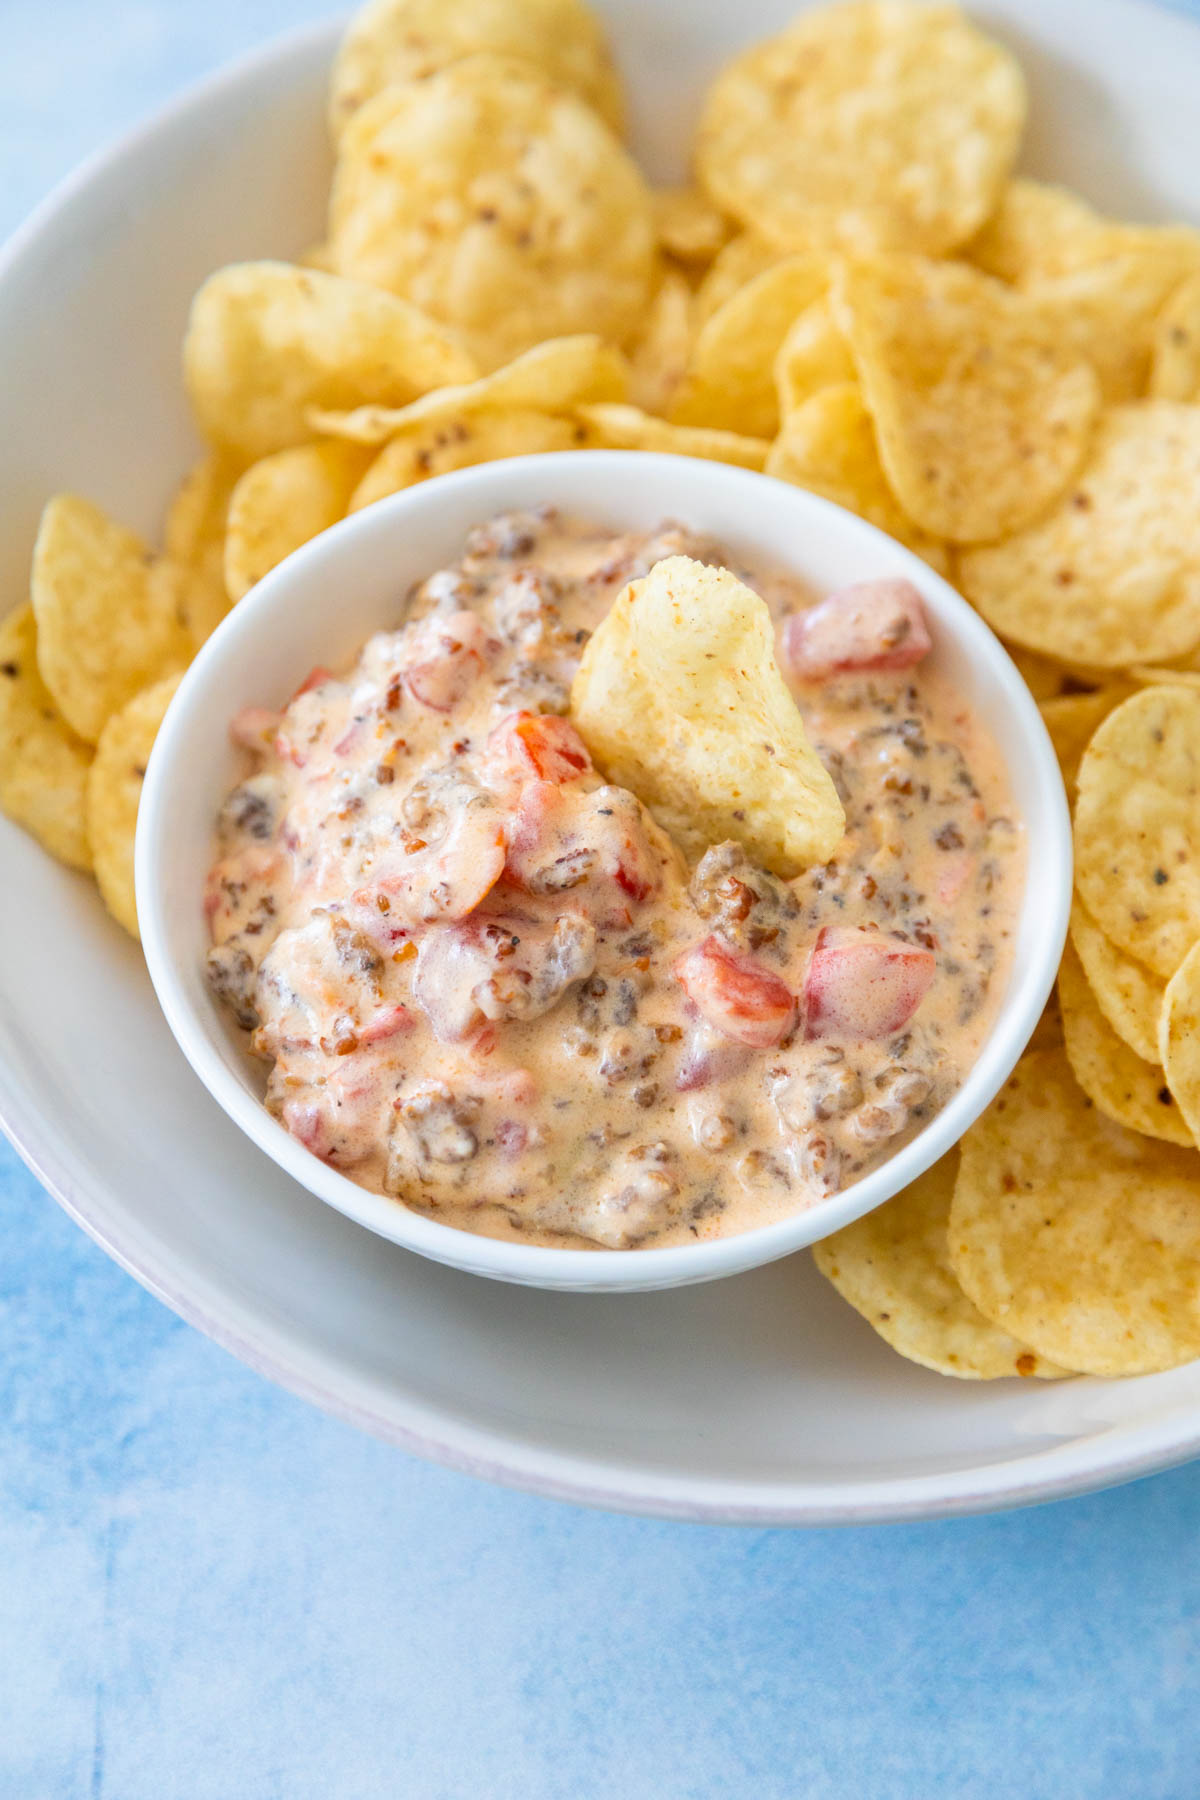 The sausage dip is in a bowl nestled inside a bowl of tortilla chips for serving.